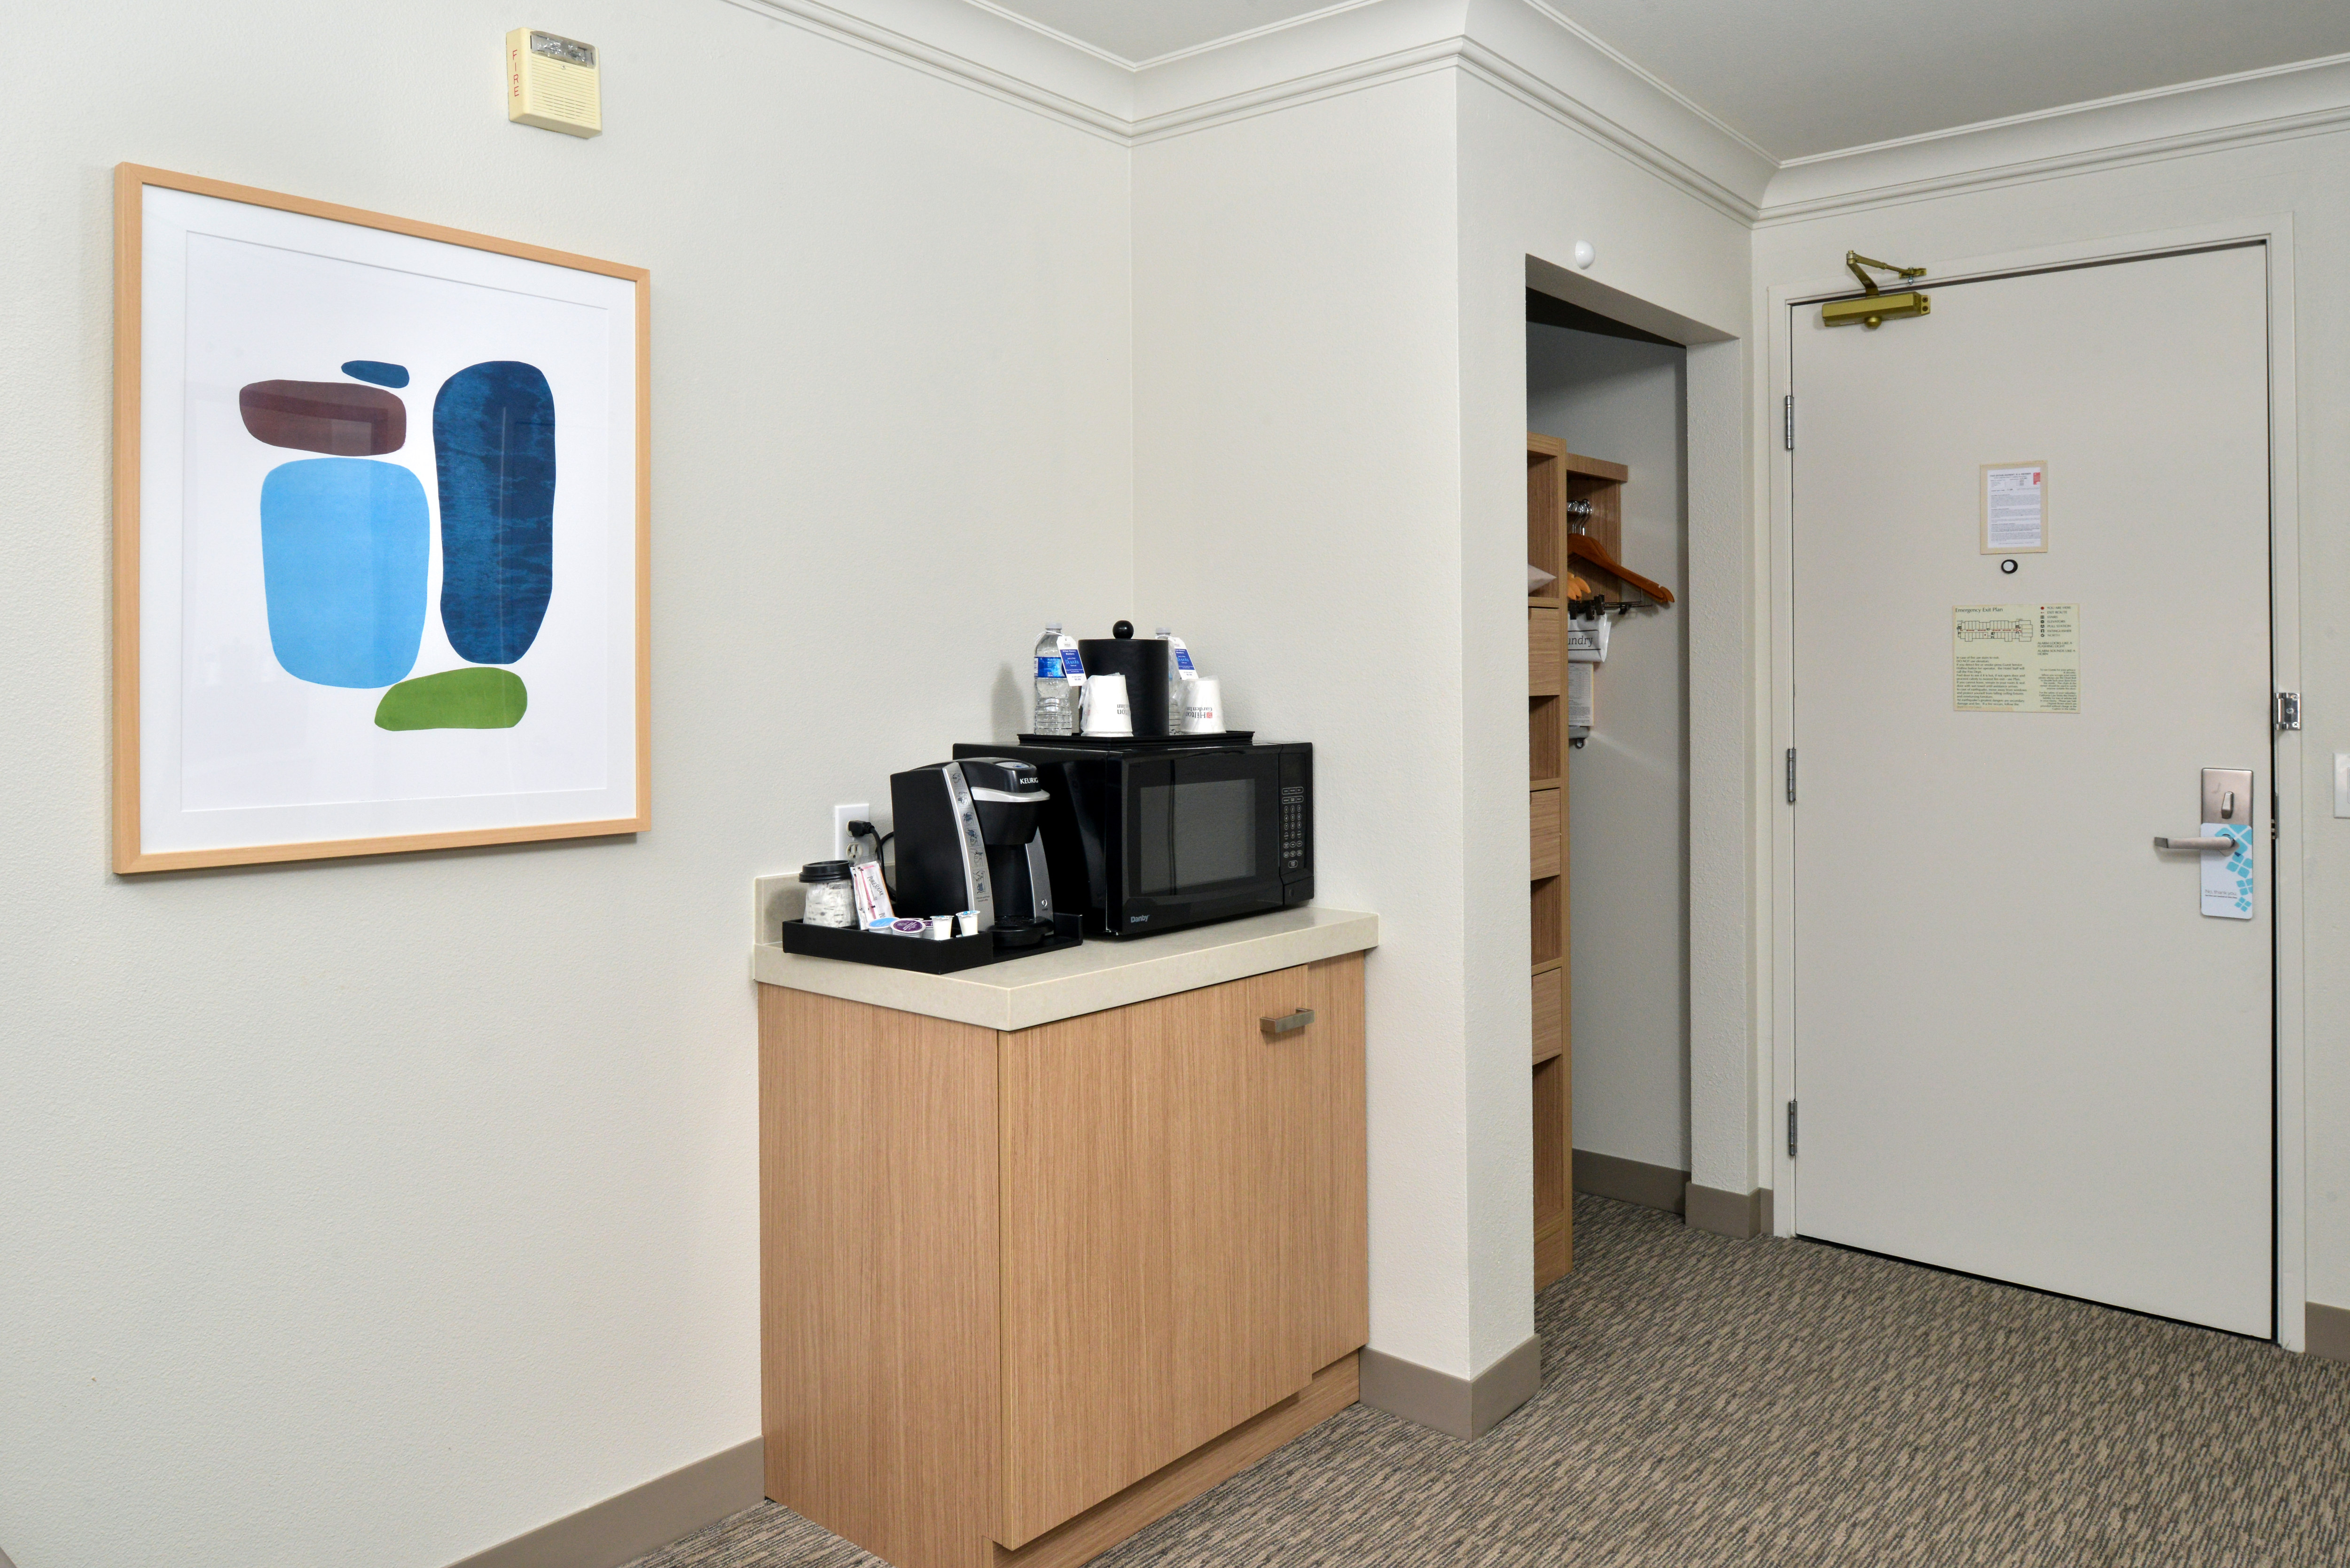 guest room coffee maker, microwave, closet